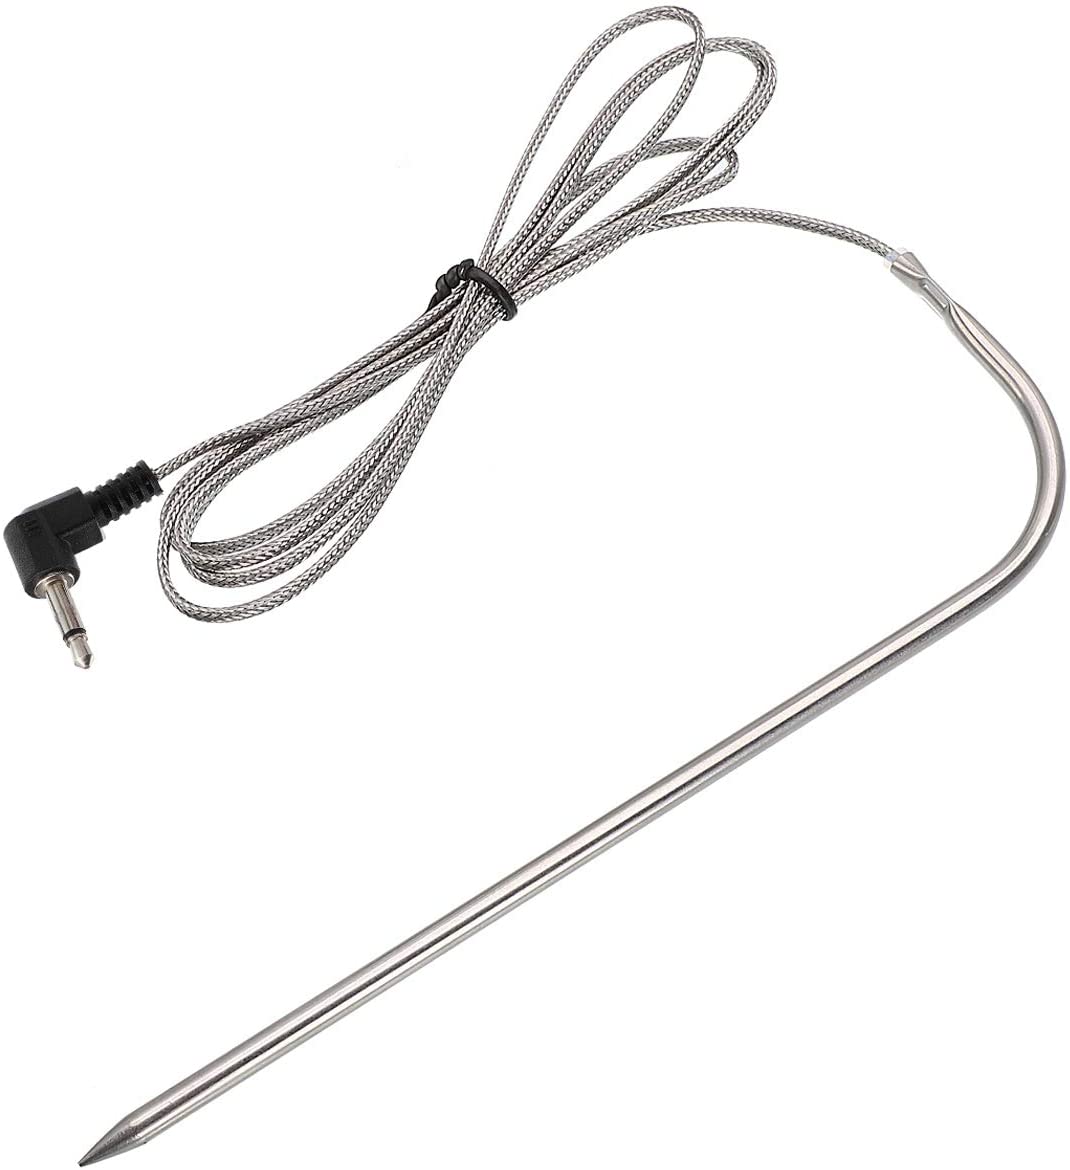 Replacement Meat Probe for Pit Boss Pellet Grills and Pellet